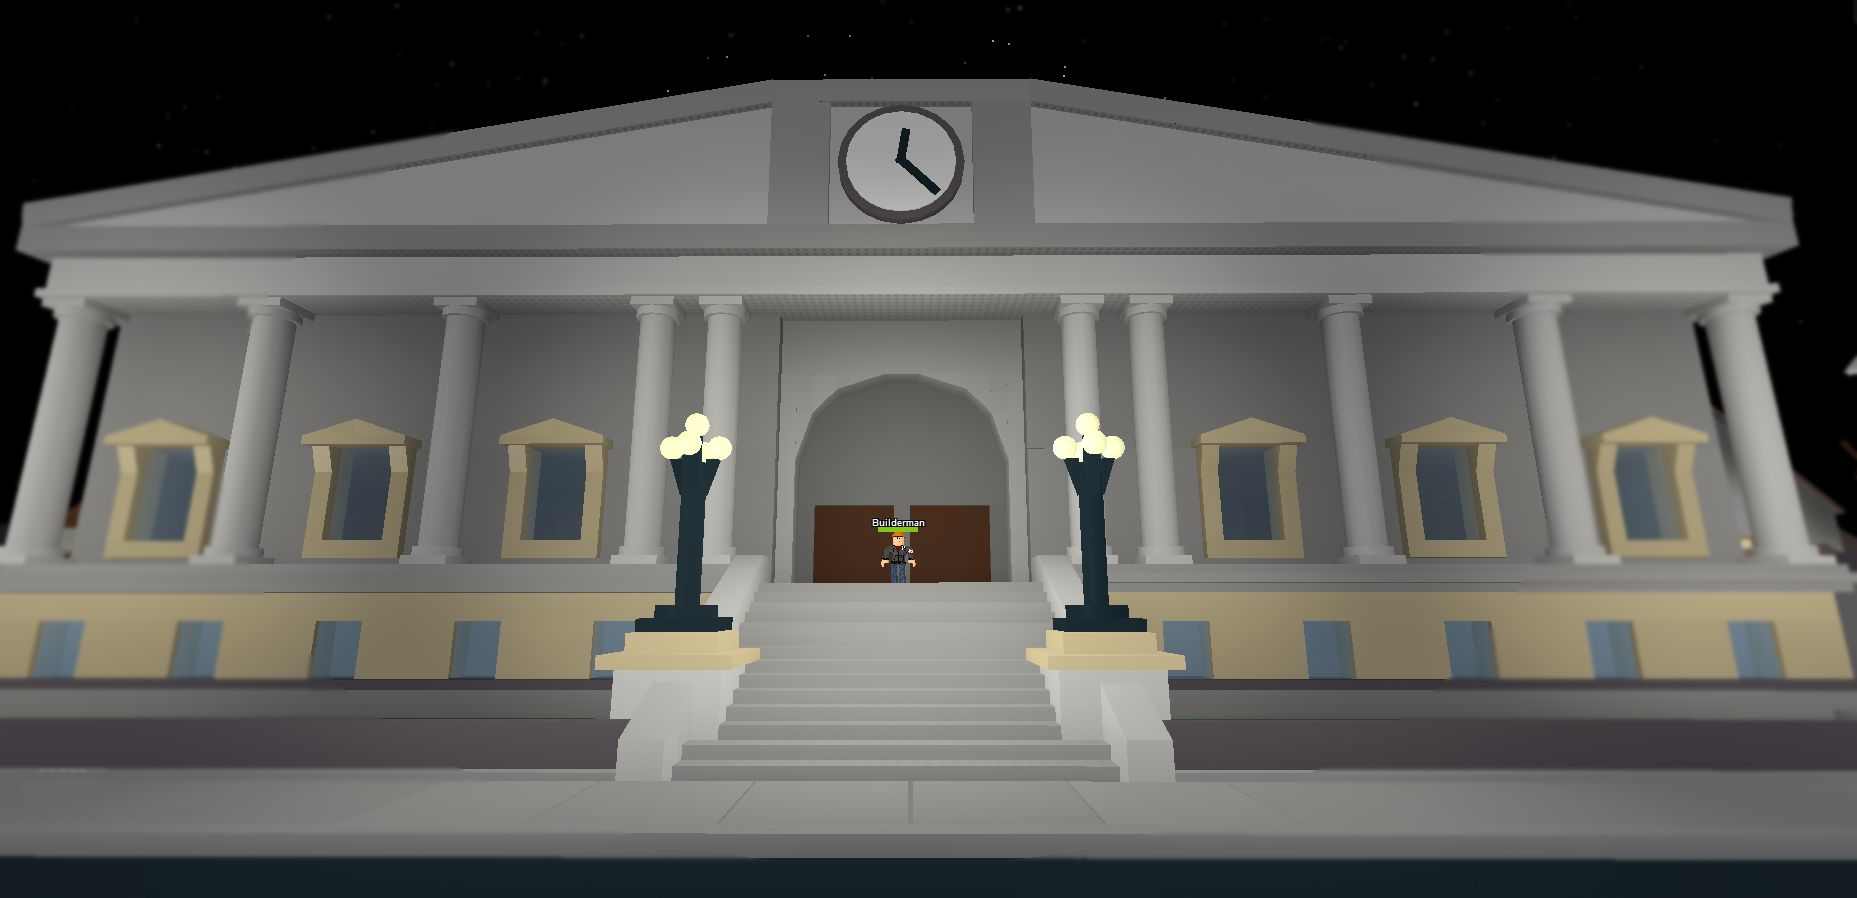 Introducing Roblox Halloween 2013 The Witching Hour Roblox Blog - roblox witching hour rats